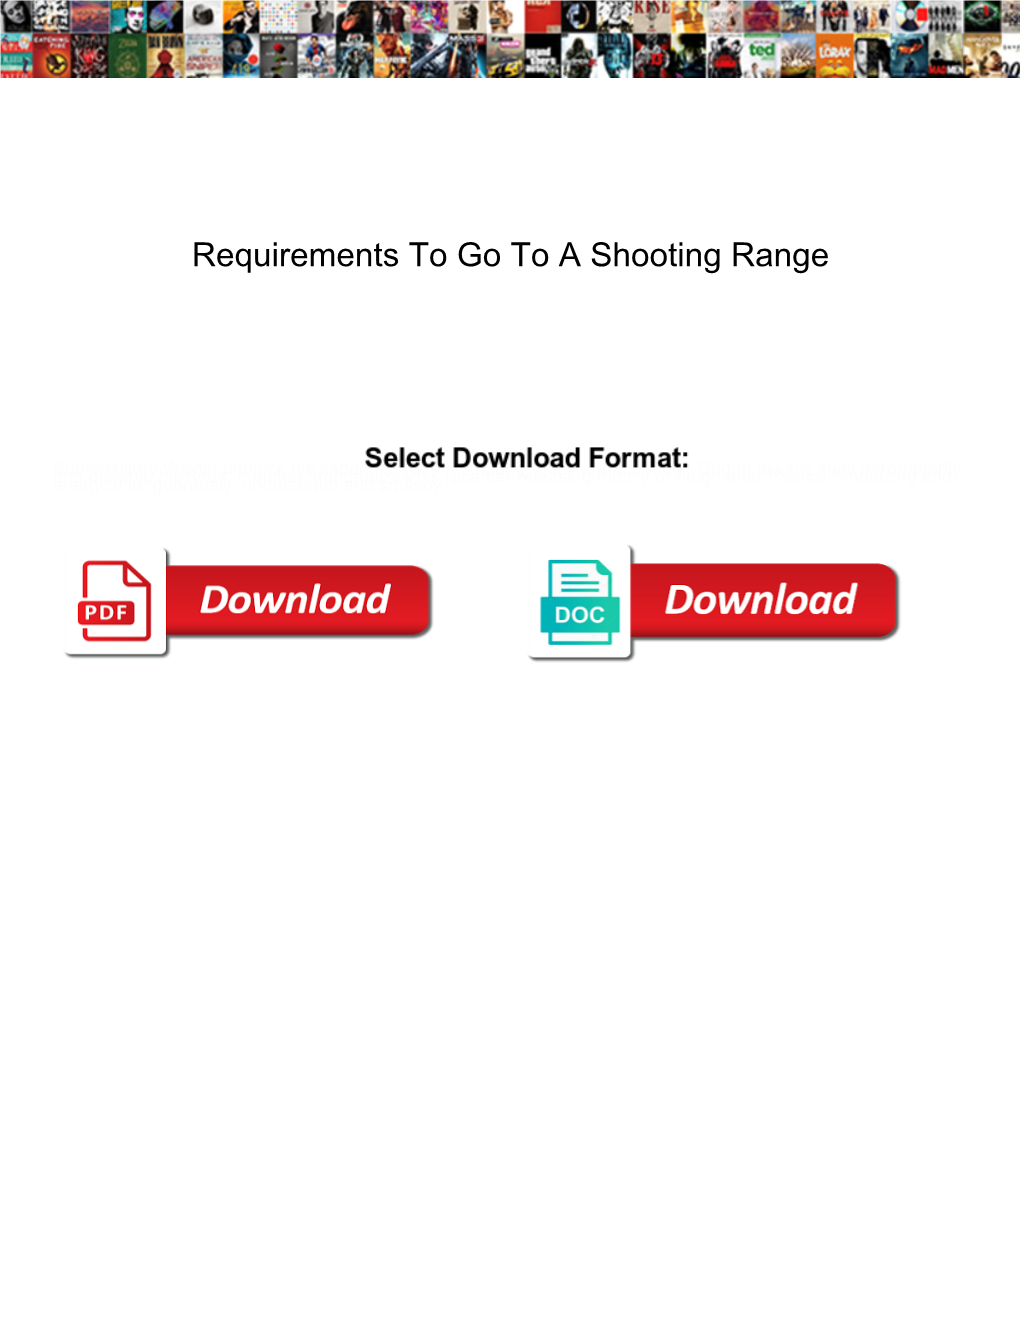 Requirements to Go to a Shooting Range